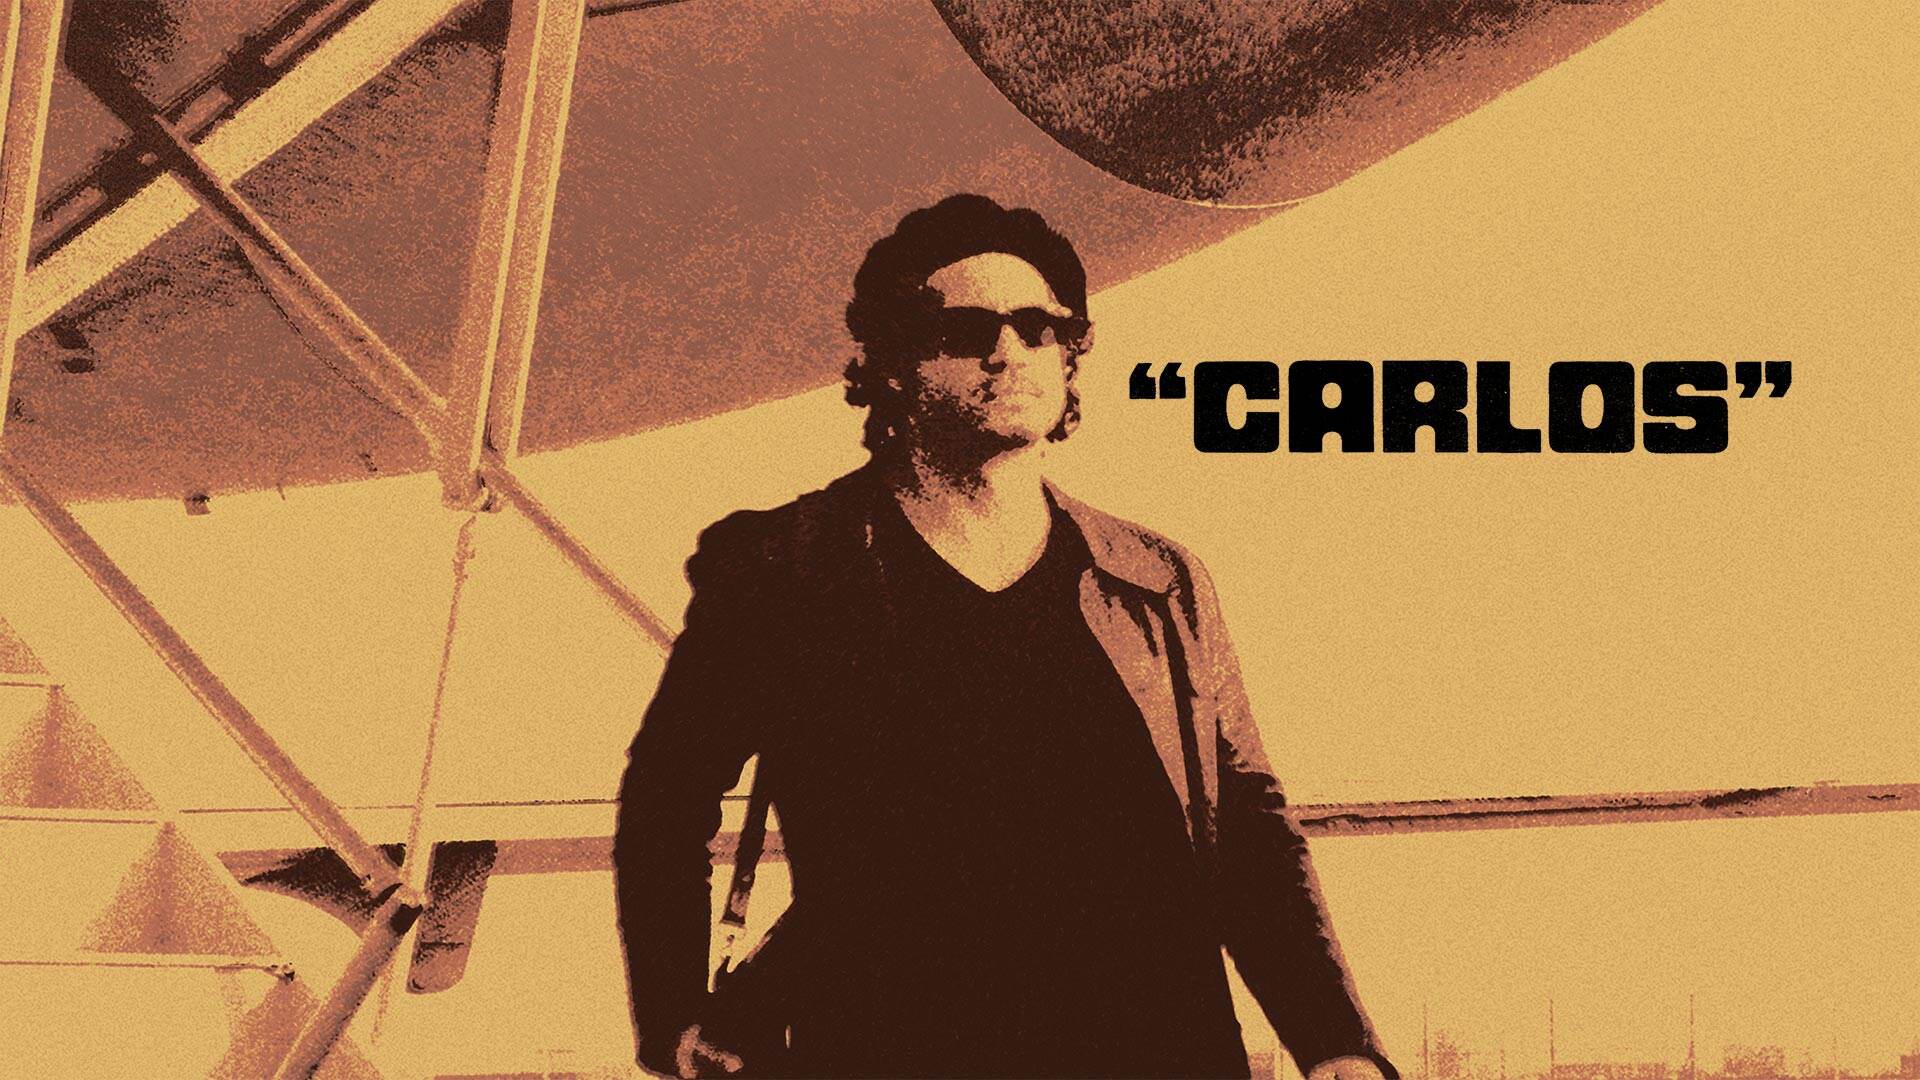 30-facts-about-the-movie-carlos